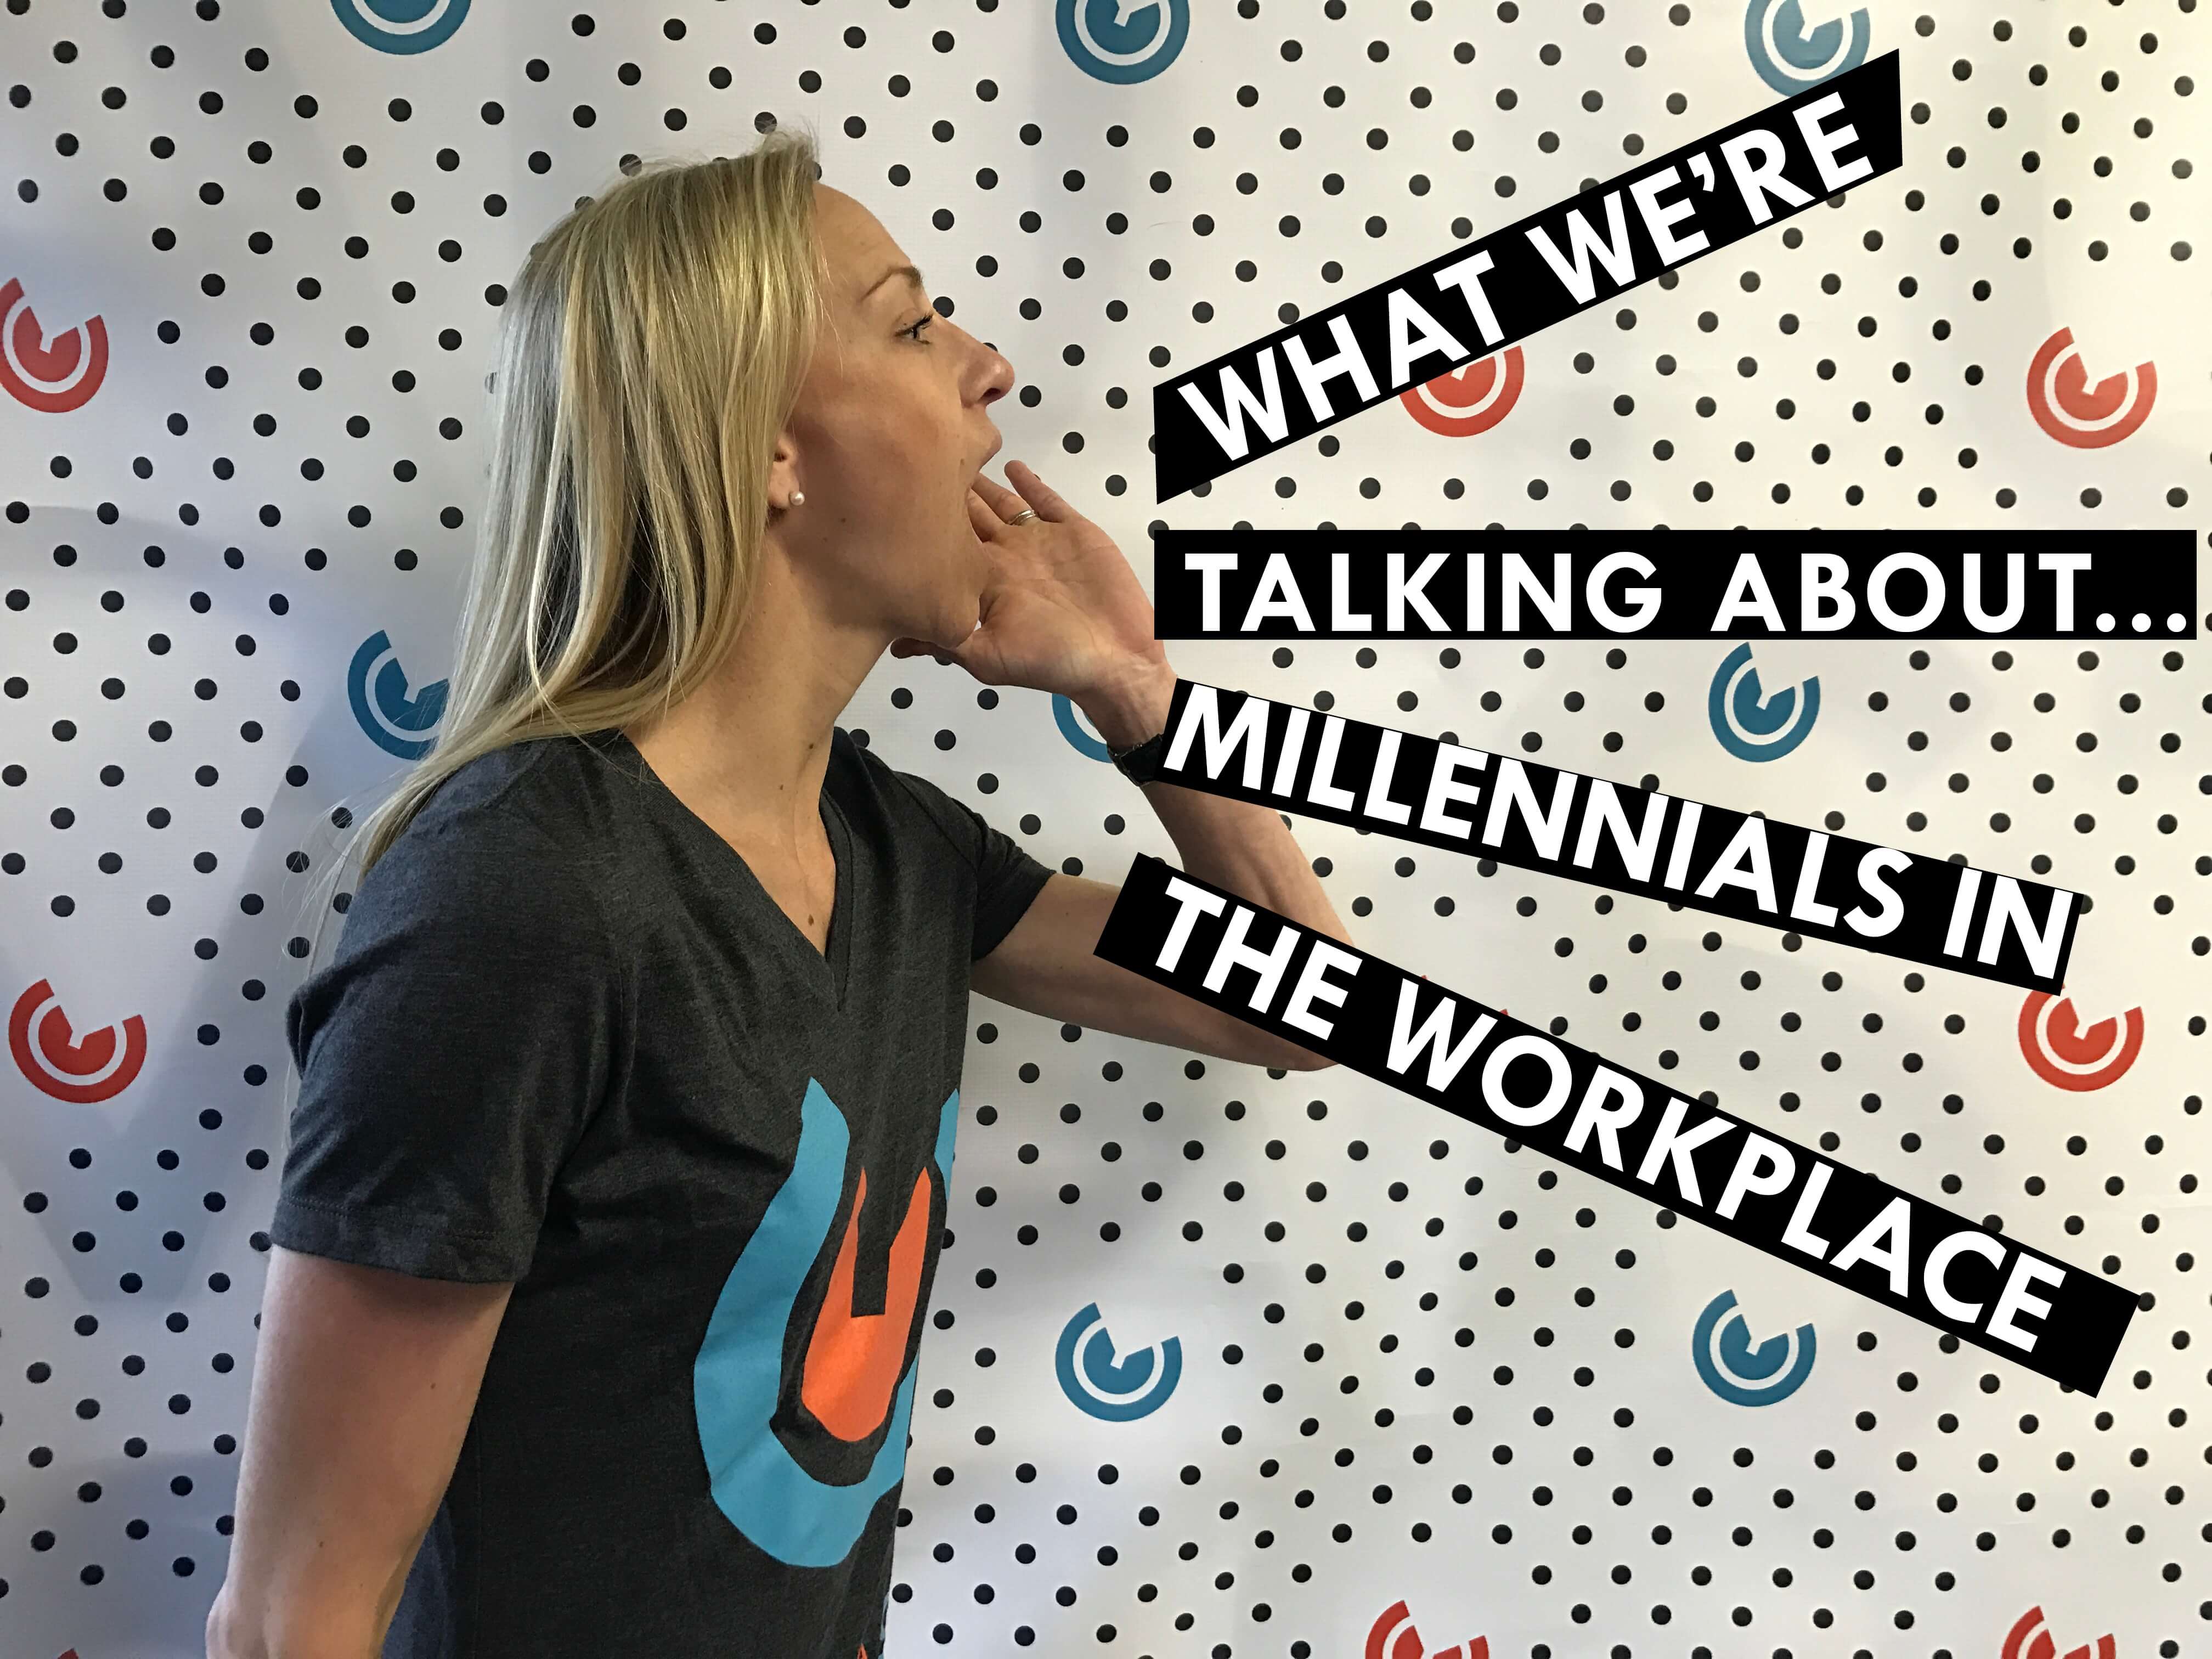 What We're Talking About...Millennials In the Workplace